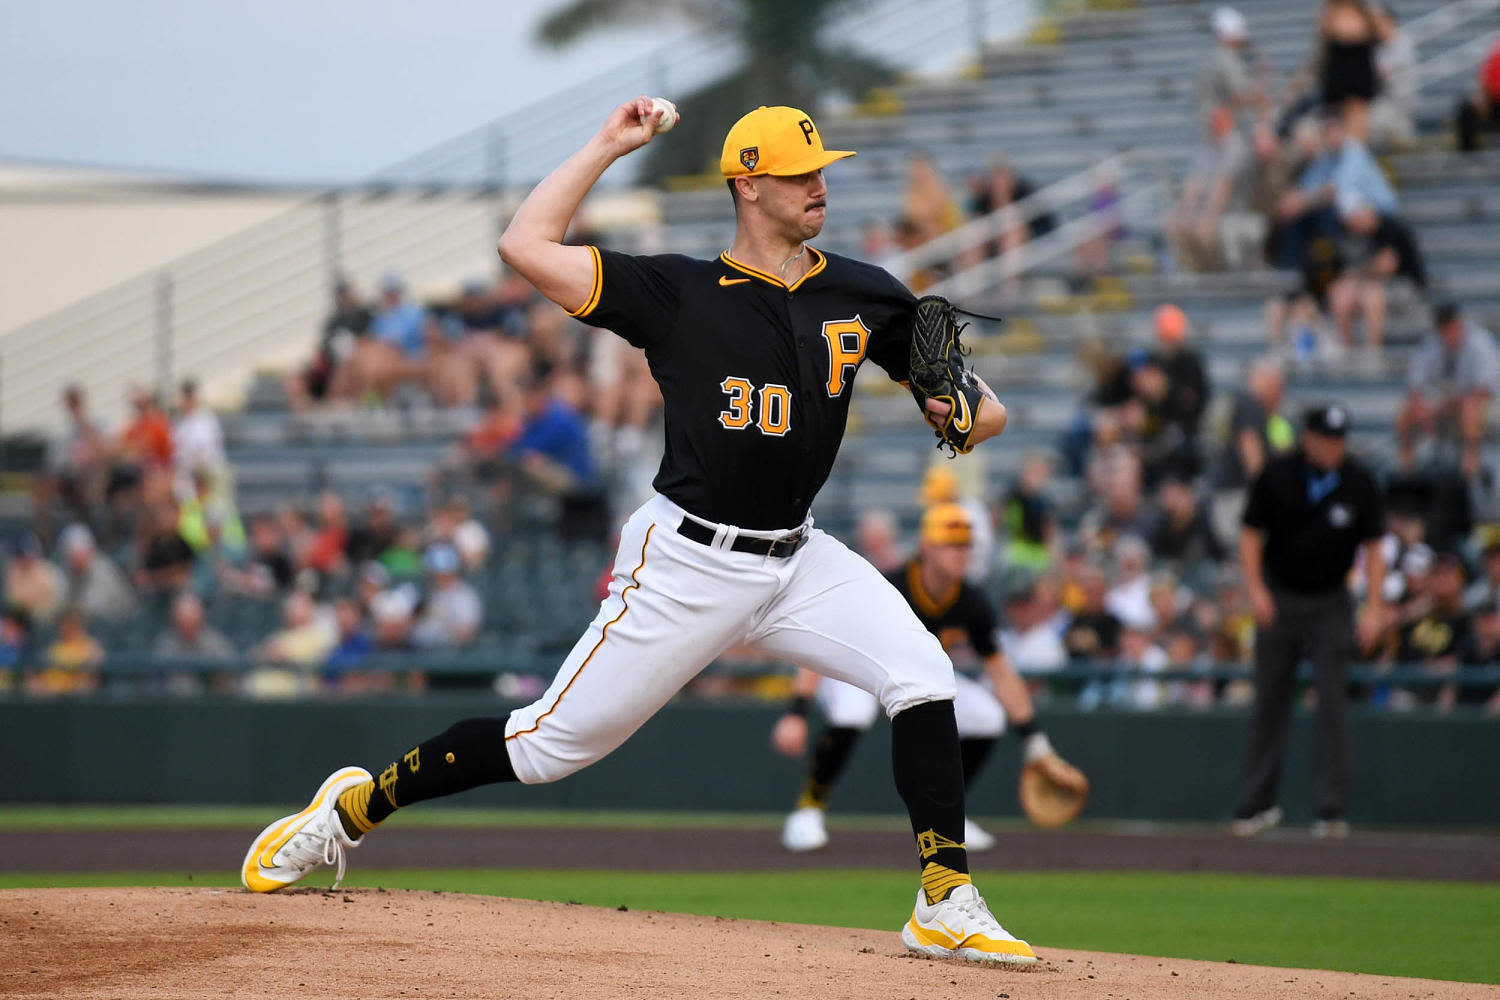 All about Paul Skenes, the hard-throwing top baseball prospect making his MLB debut